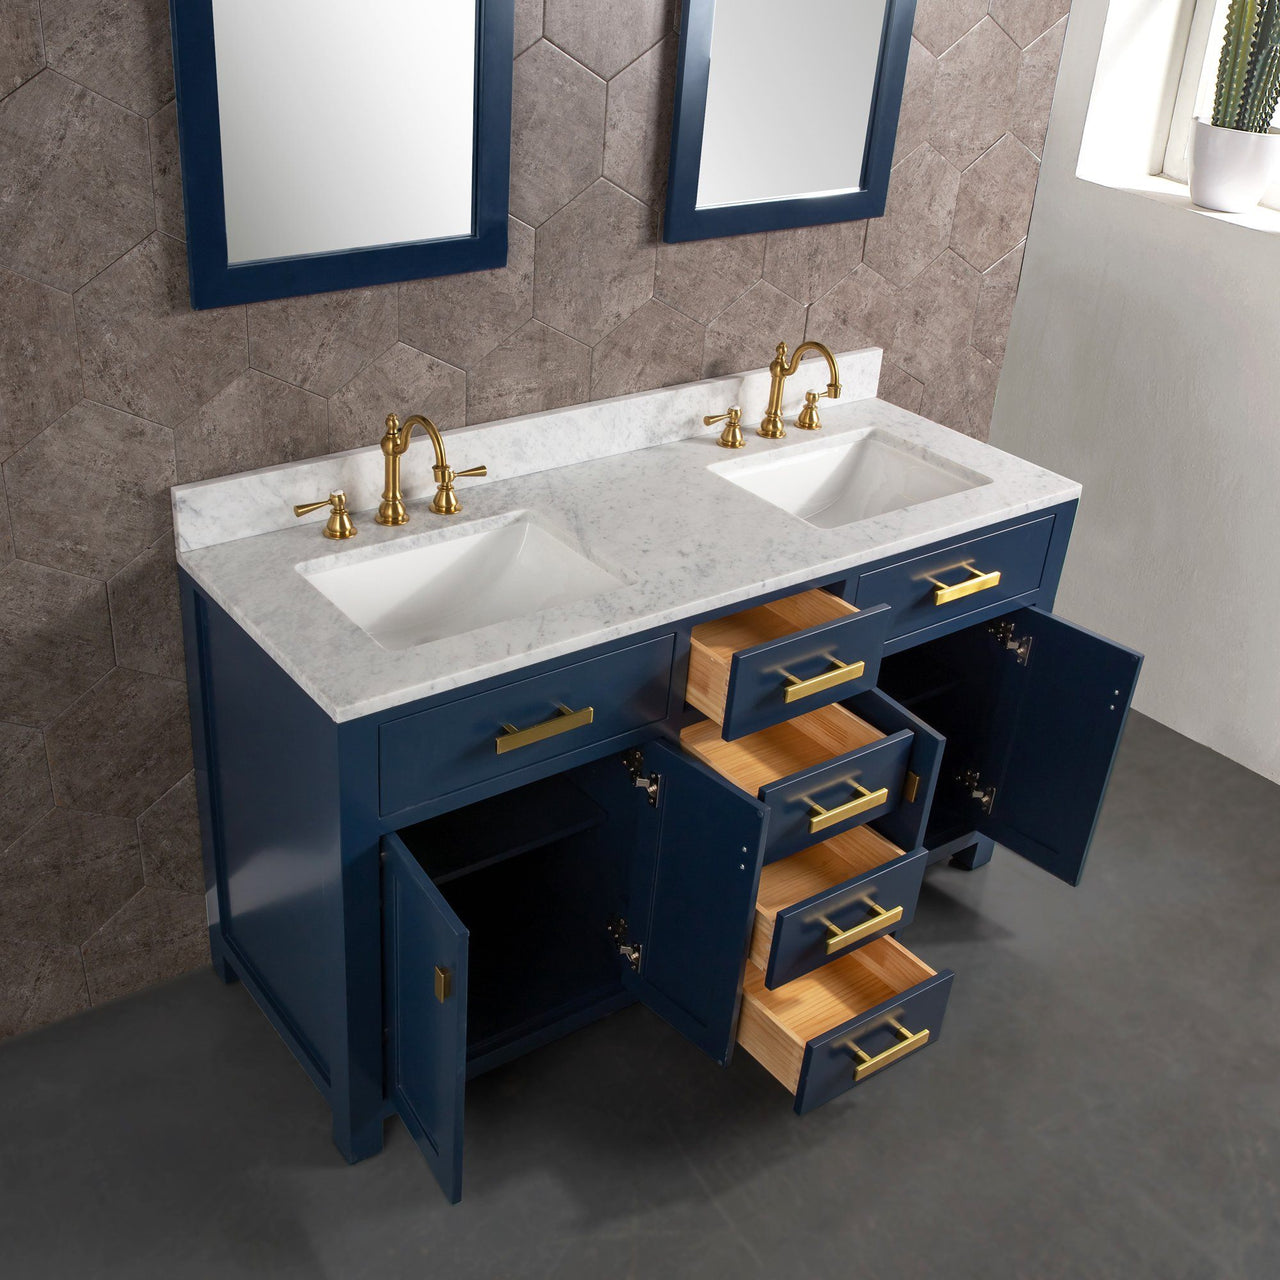 Madison 60-Inch Double Sink Carrara White Marble Vanity In Monarch BlueWith F2-0012-06-TL Lavatory Faucet(s) Vanity Water Creation 